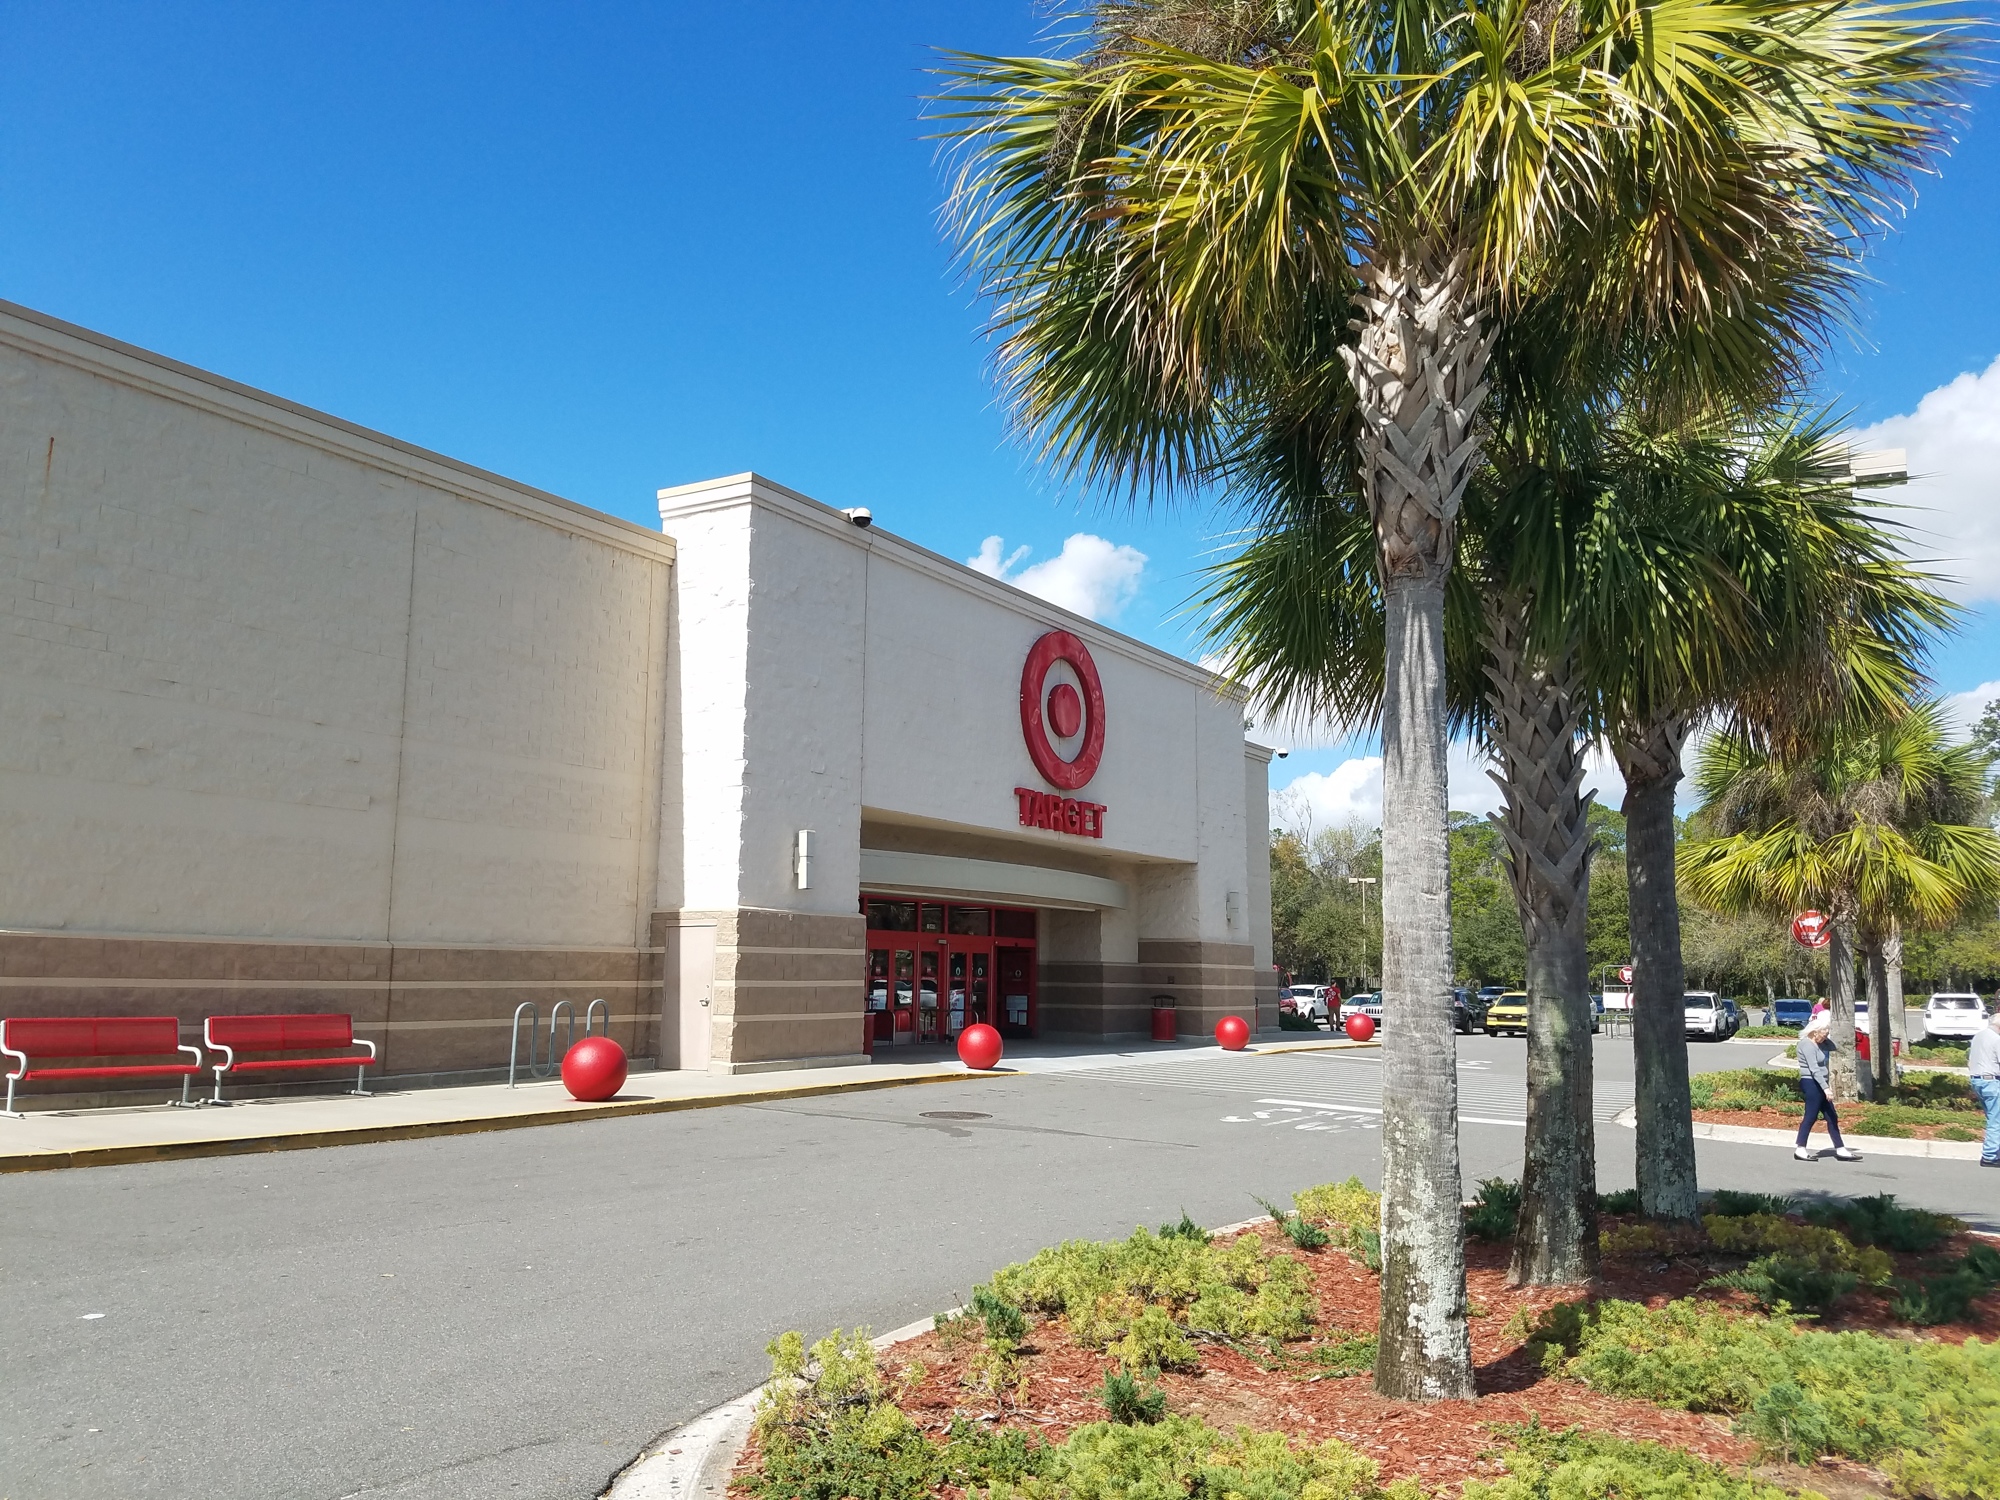 The Target at 10490 San Jose Blvd. is in city review for a $1.1 million interior remodeling for the new look.